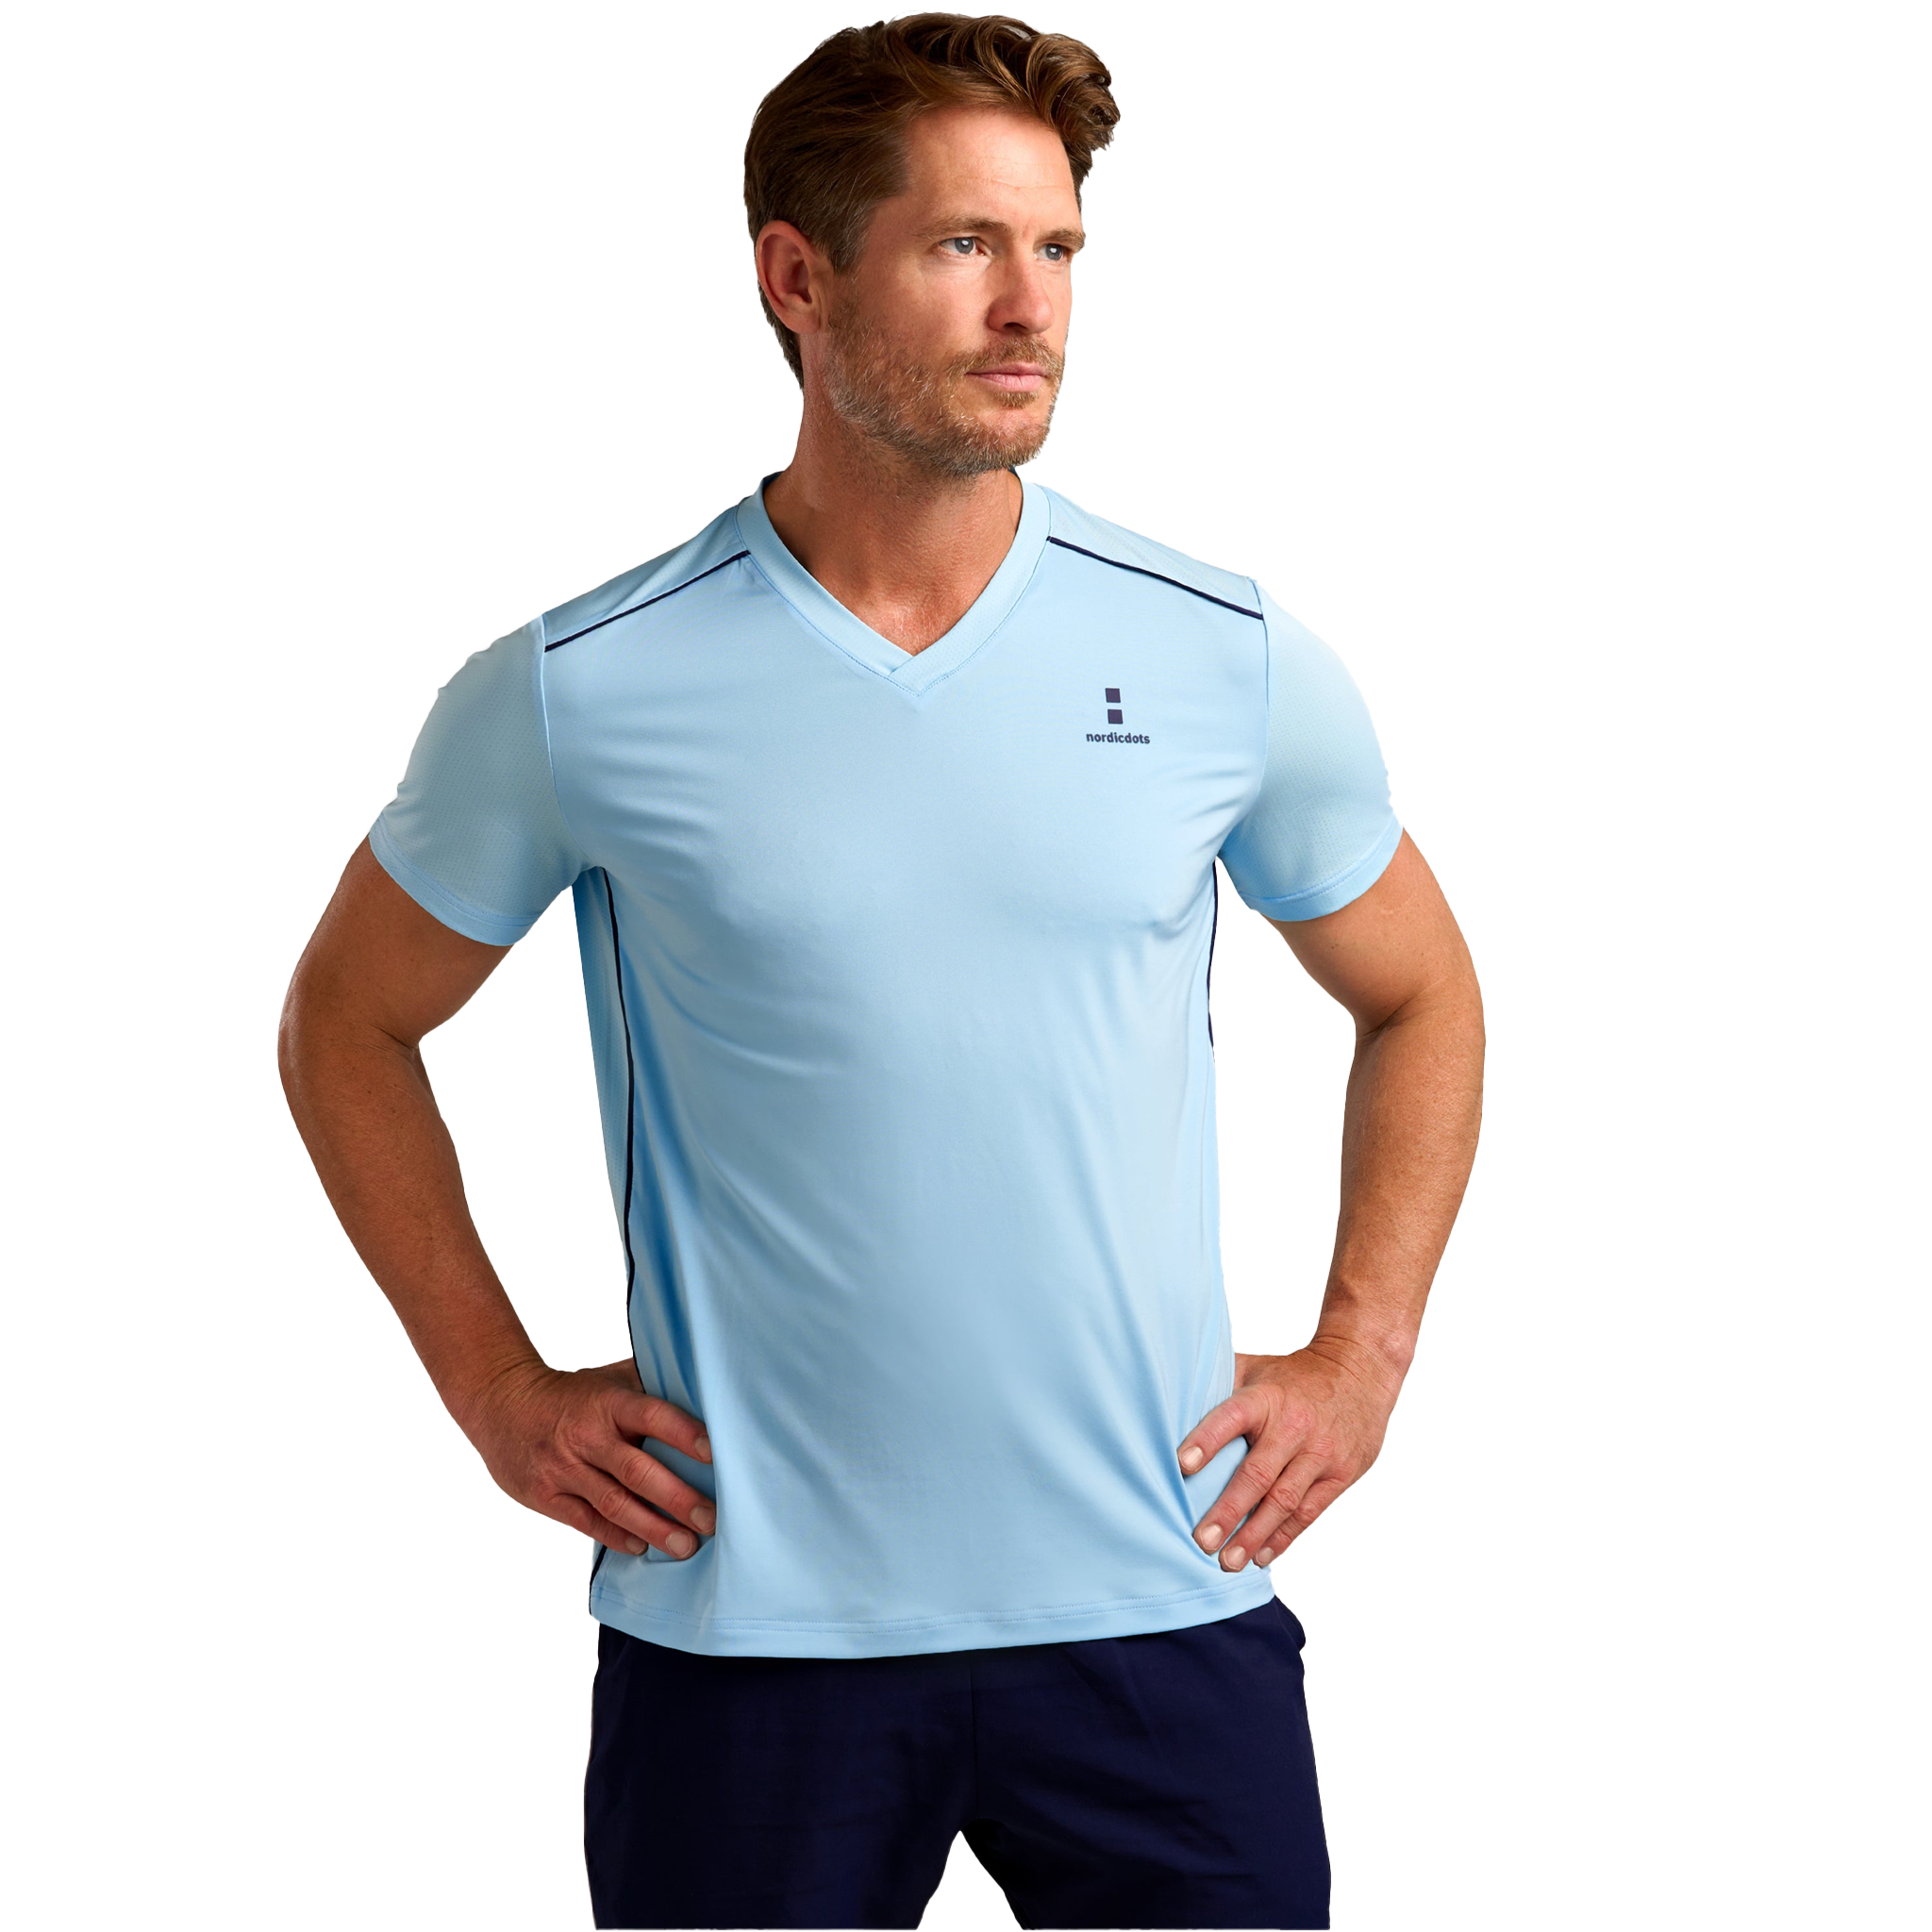 nordicdots Performance V-Tee Cooling Blue